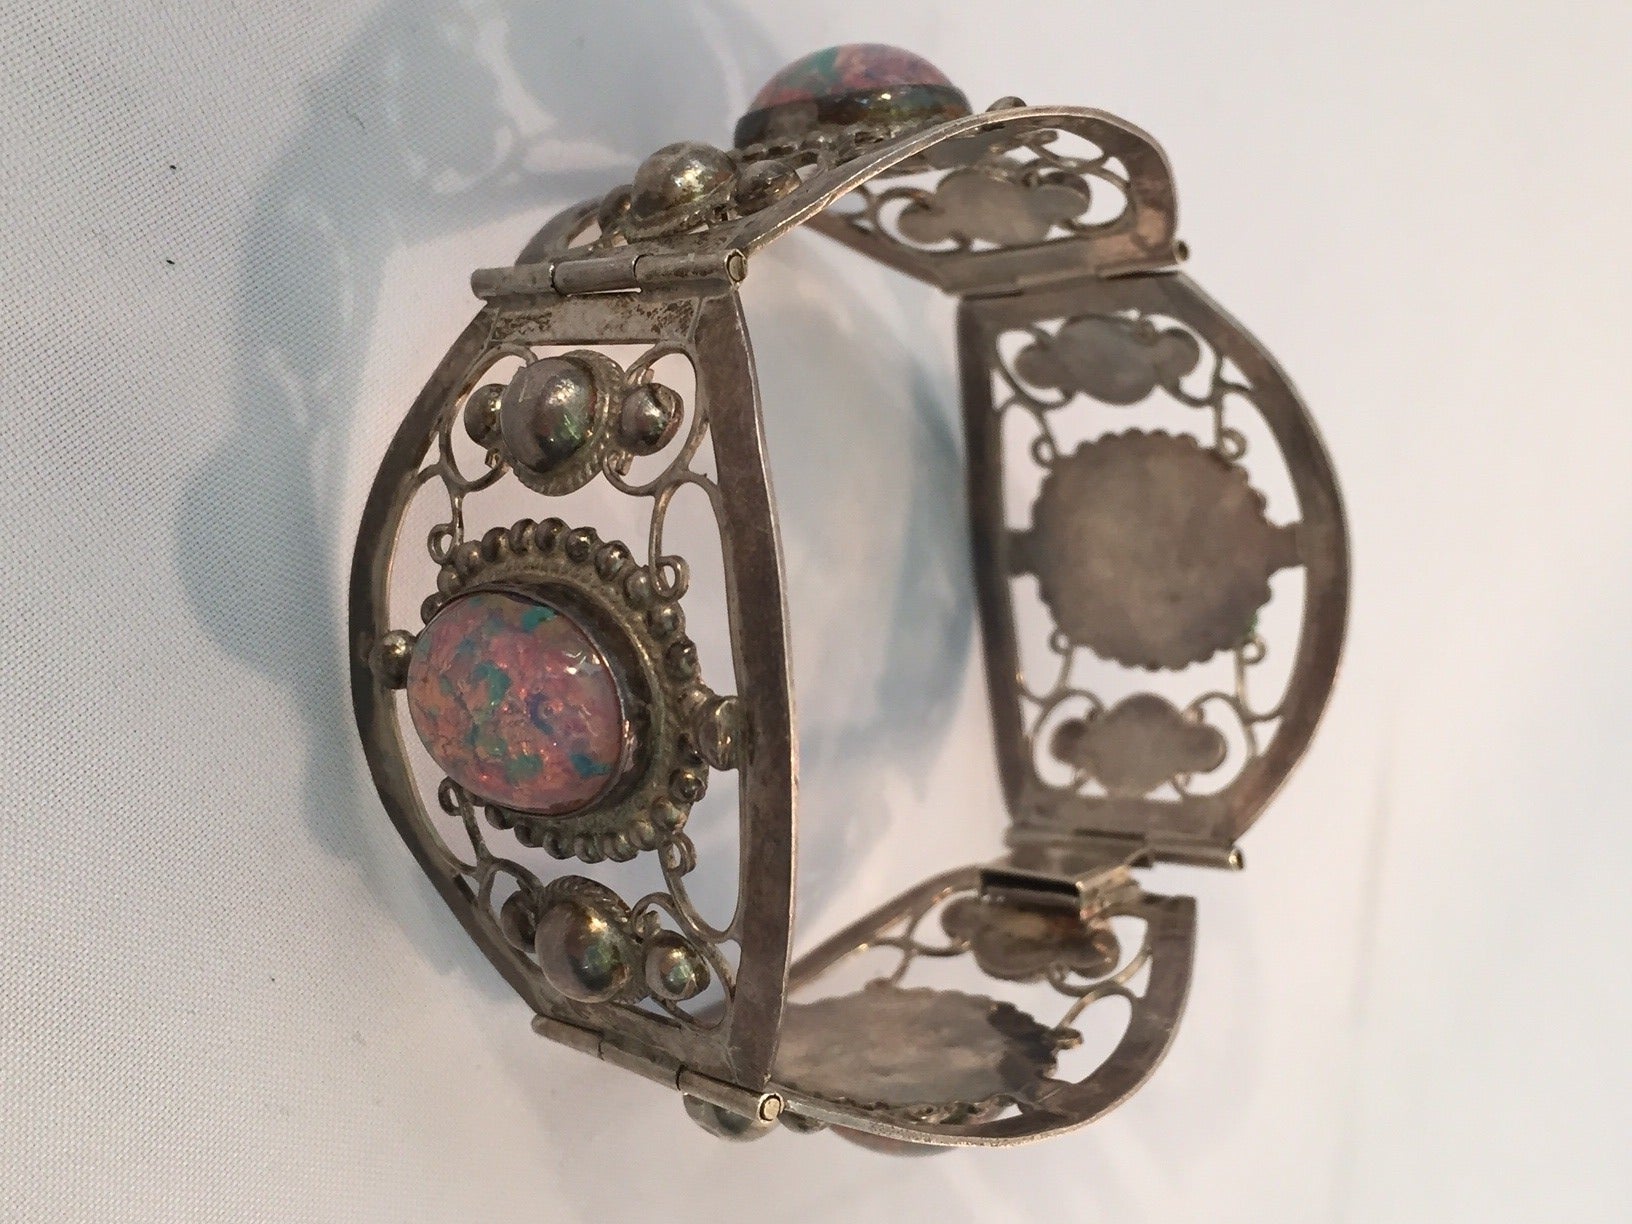 A gorgeous 1940s .925 Sterling silver Mexican made bracelet with slide-in clasp and simulated opals.